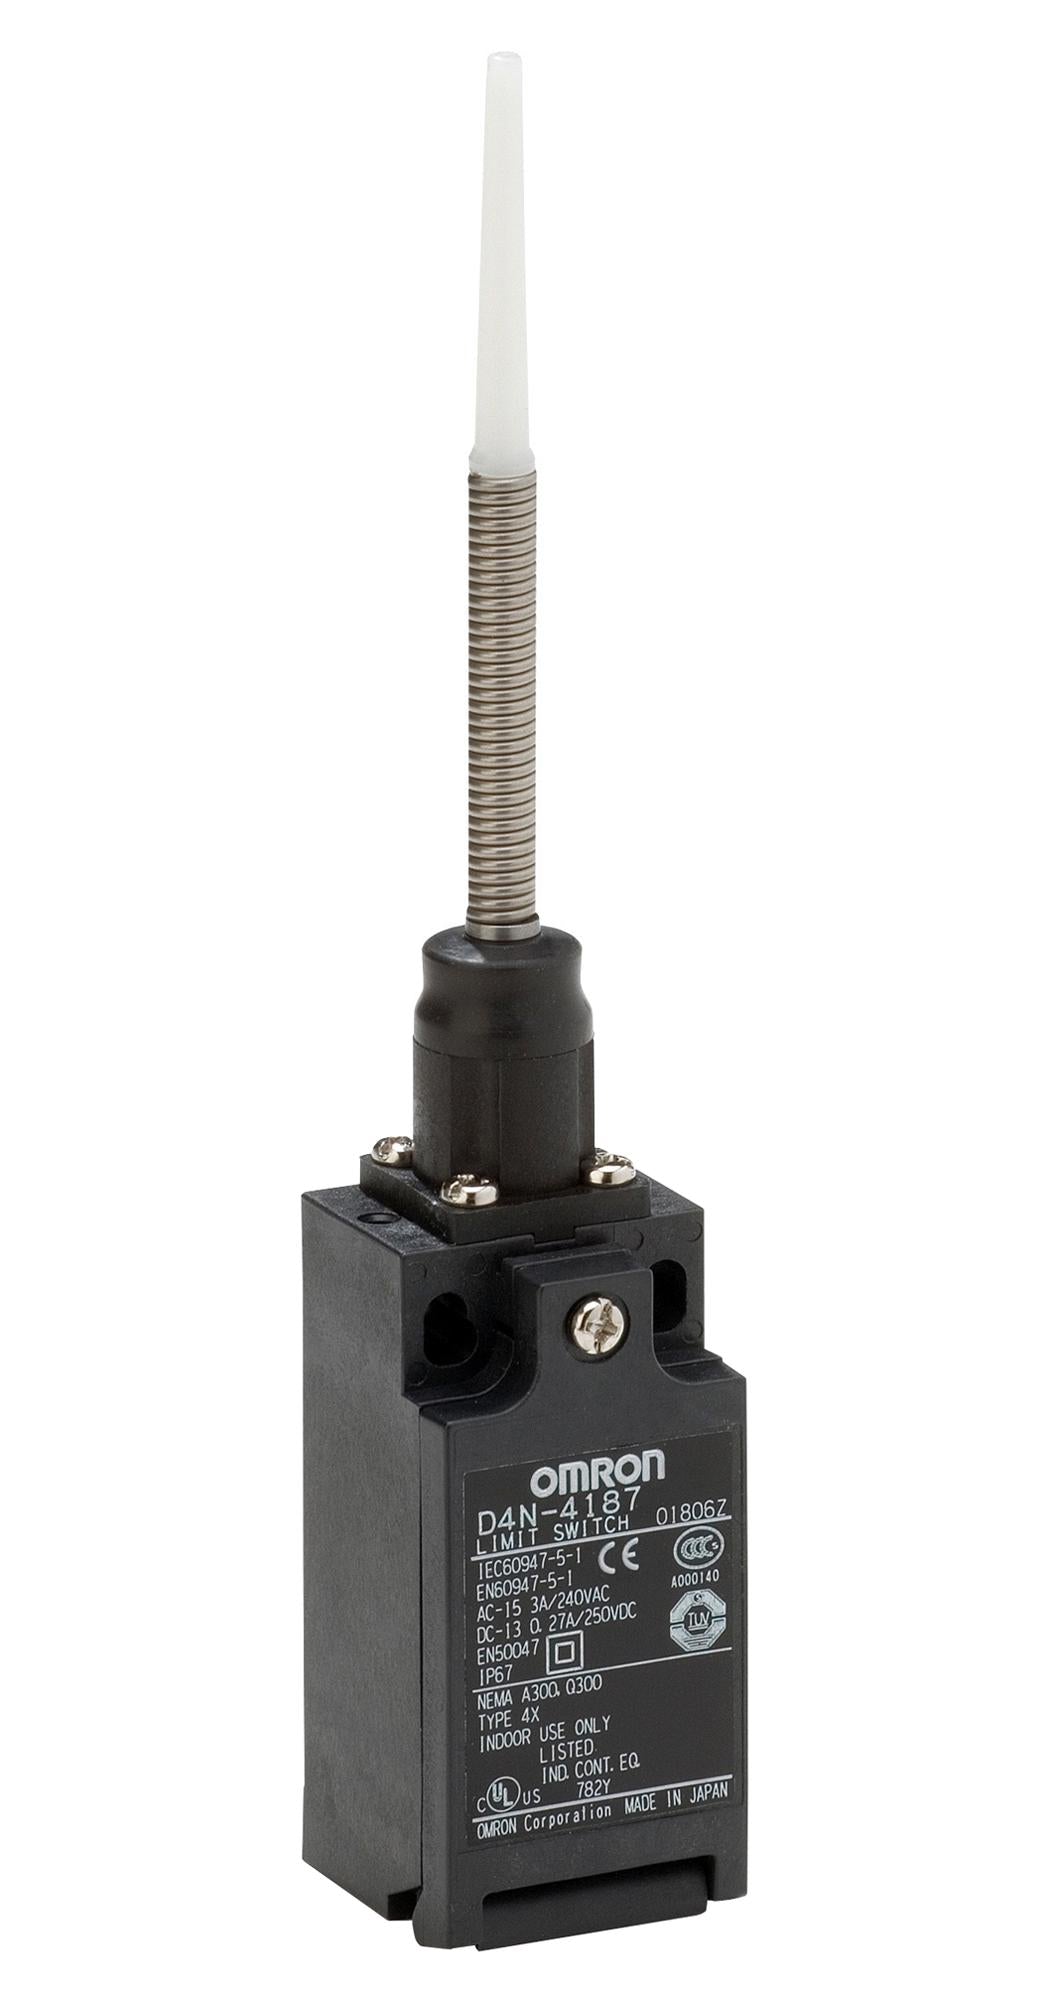 D4N-4187 LIMIT SWITCH SWITCHES OMRON